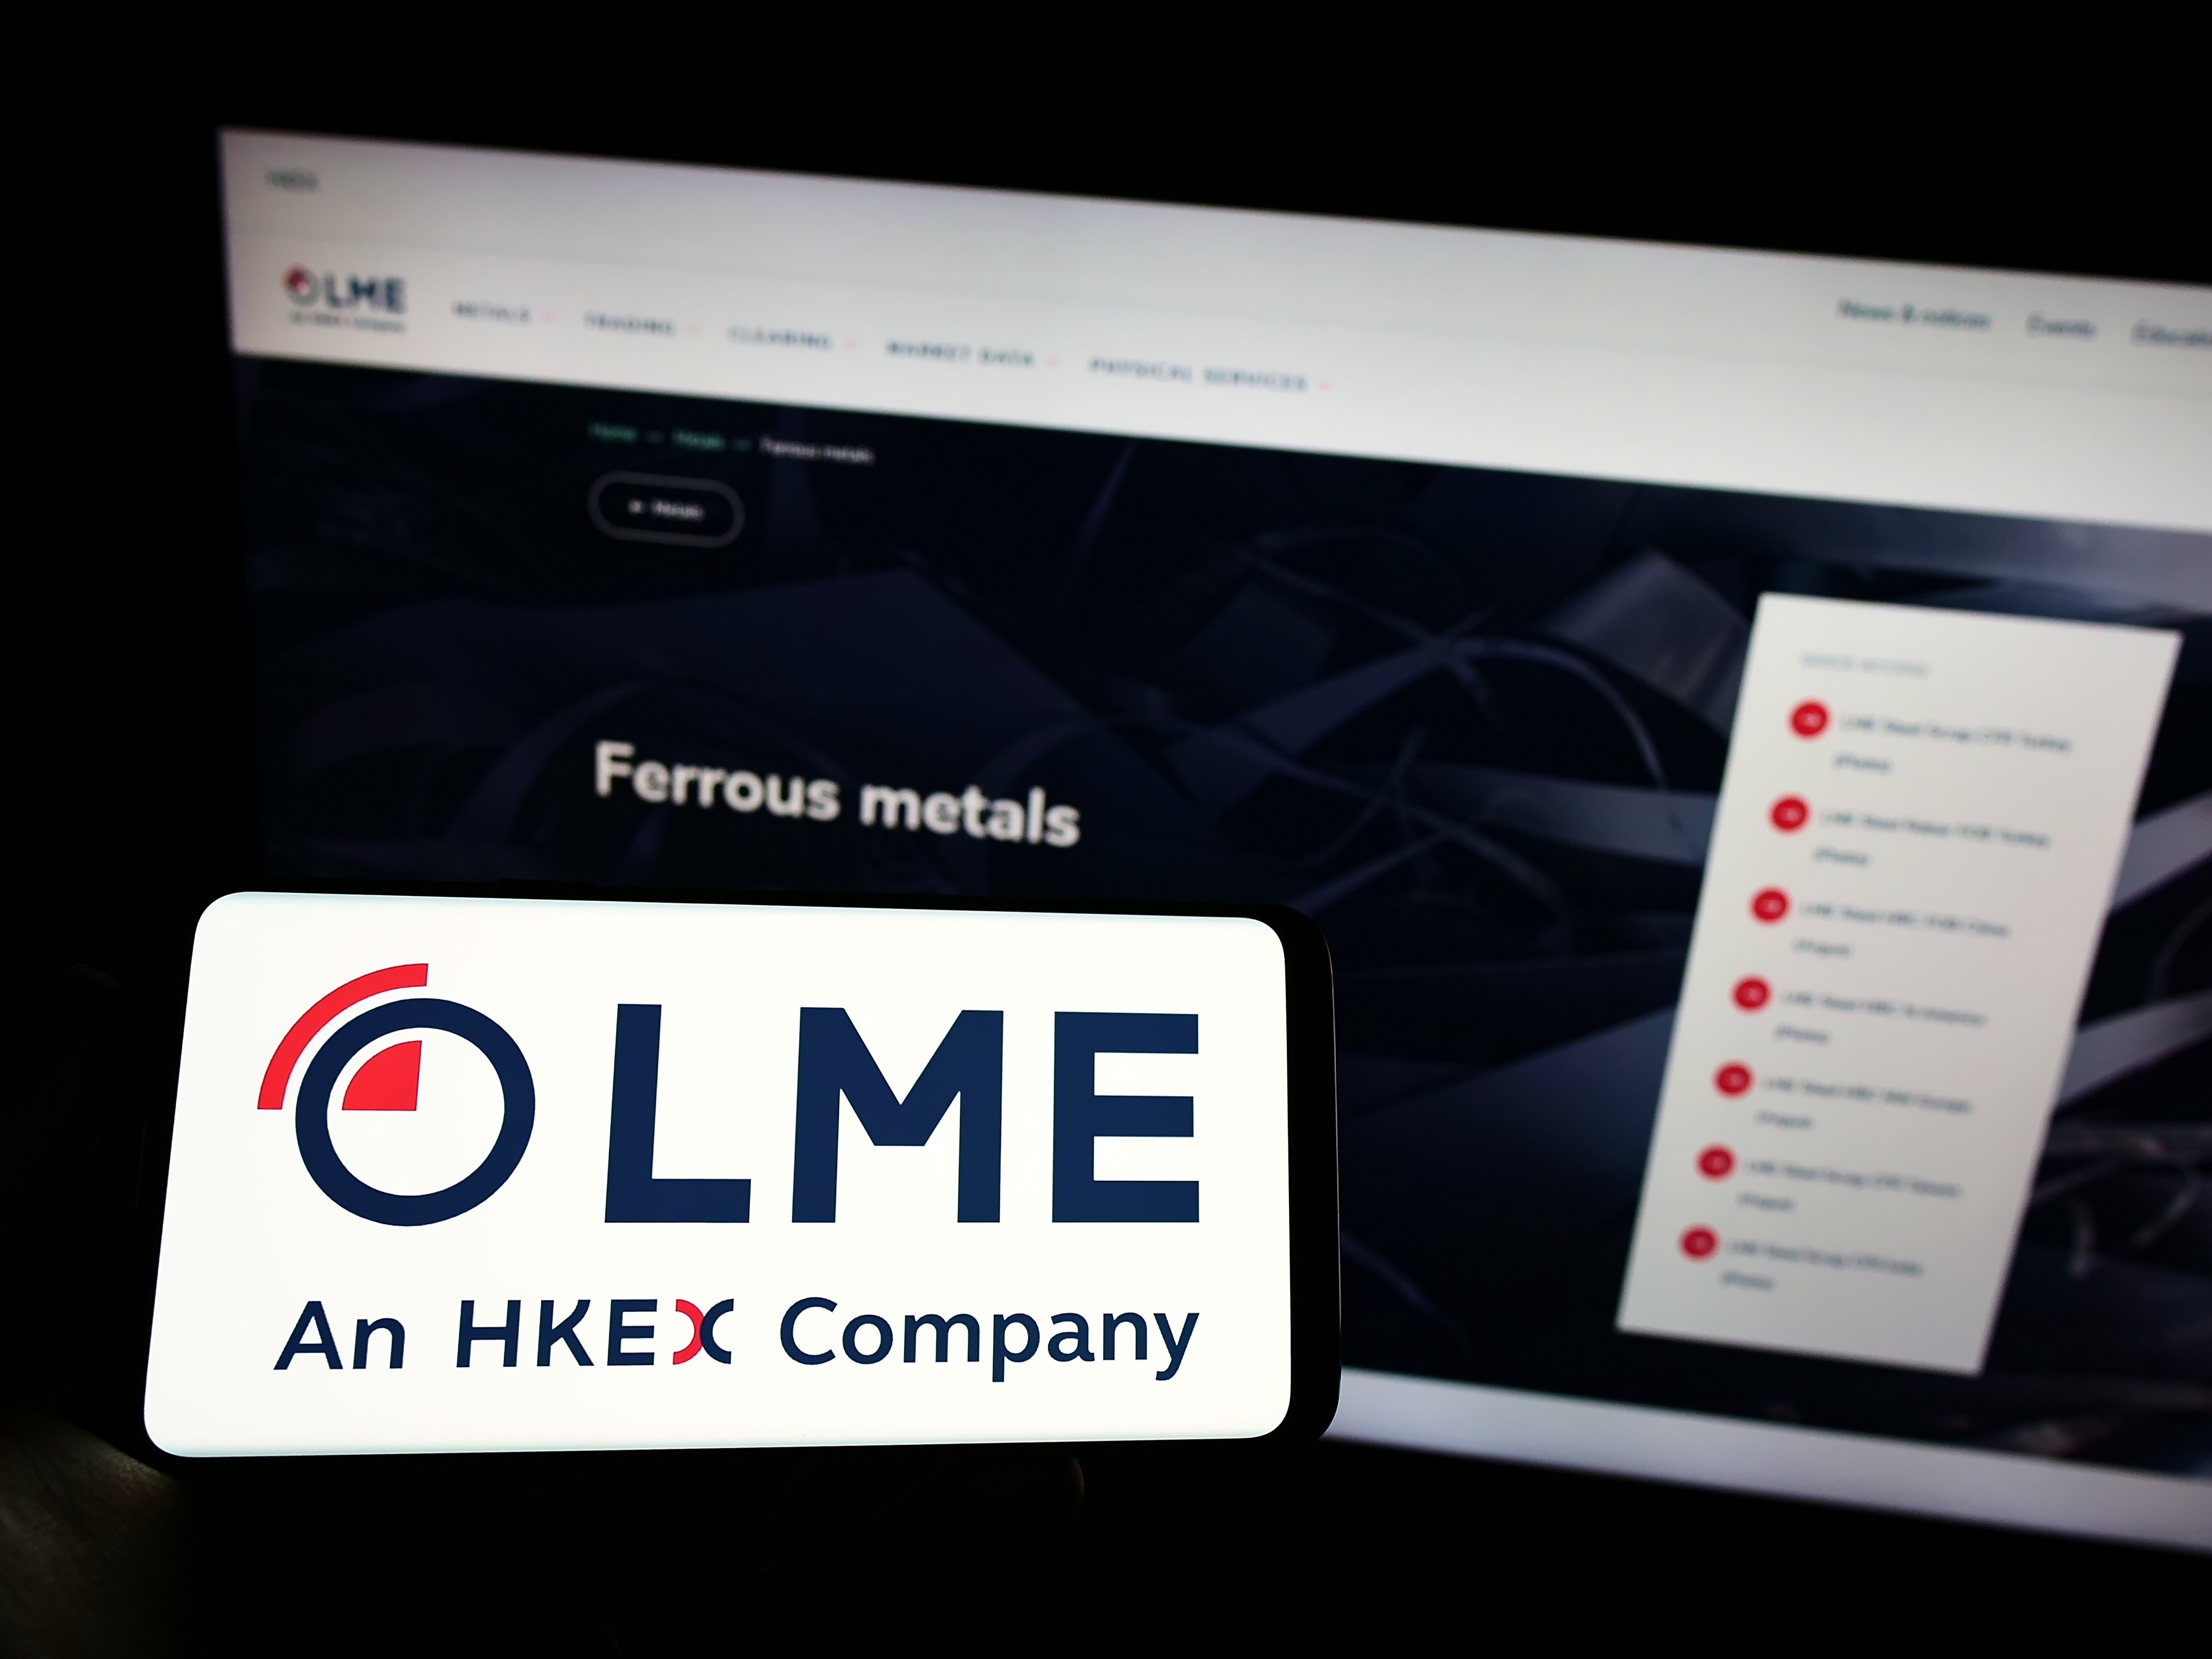 The HKEX bought the London Metal Exchange in 2012 for US$2.2 billion. Photo: Shutterstock